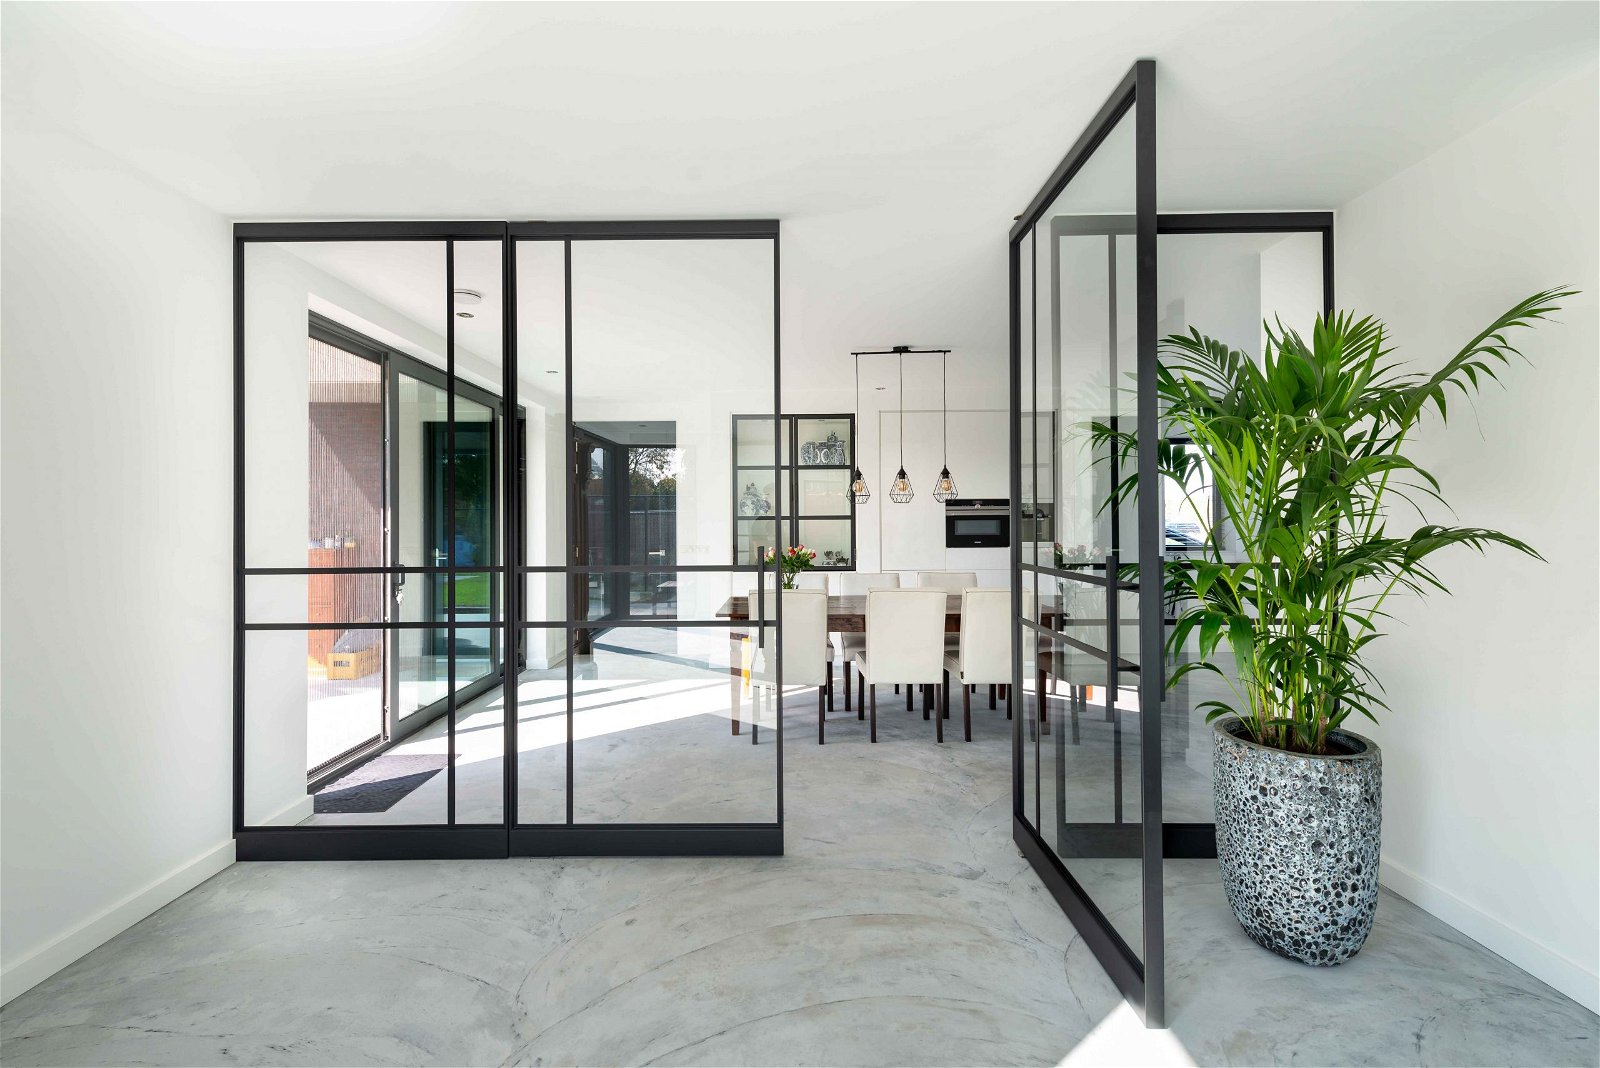 Large glass pivot doors with a steel framework 2.